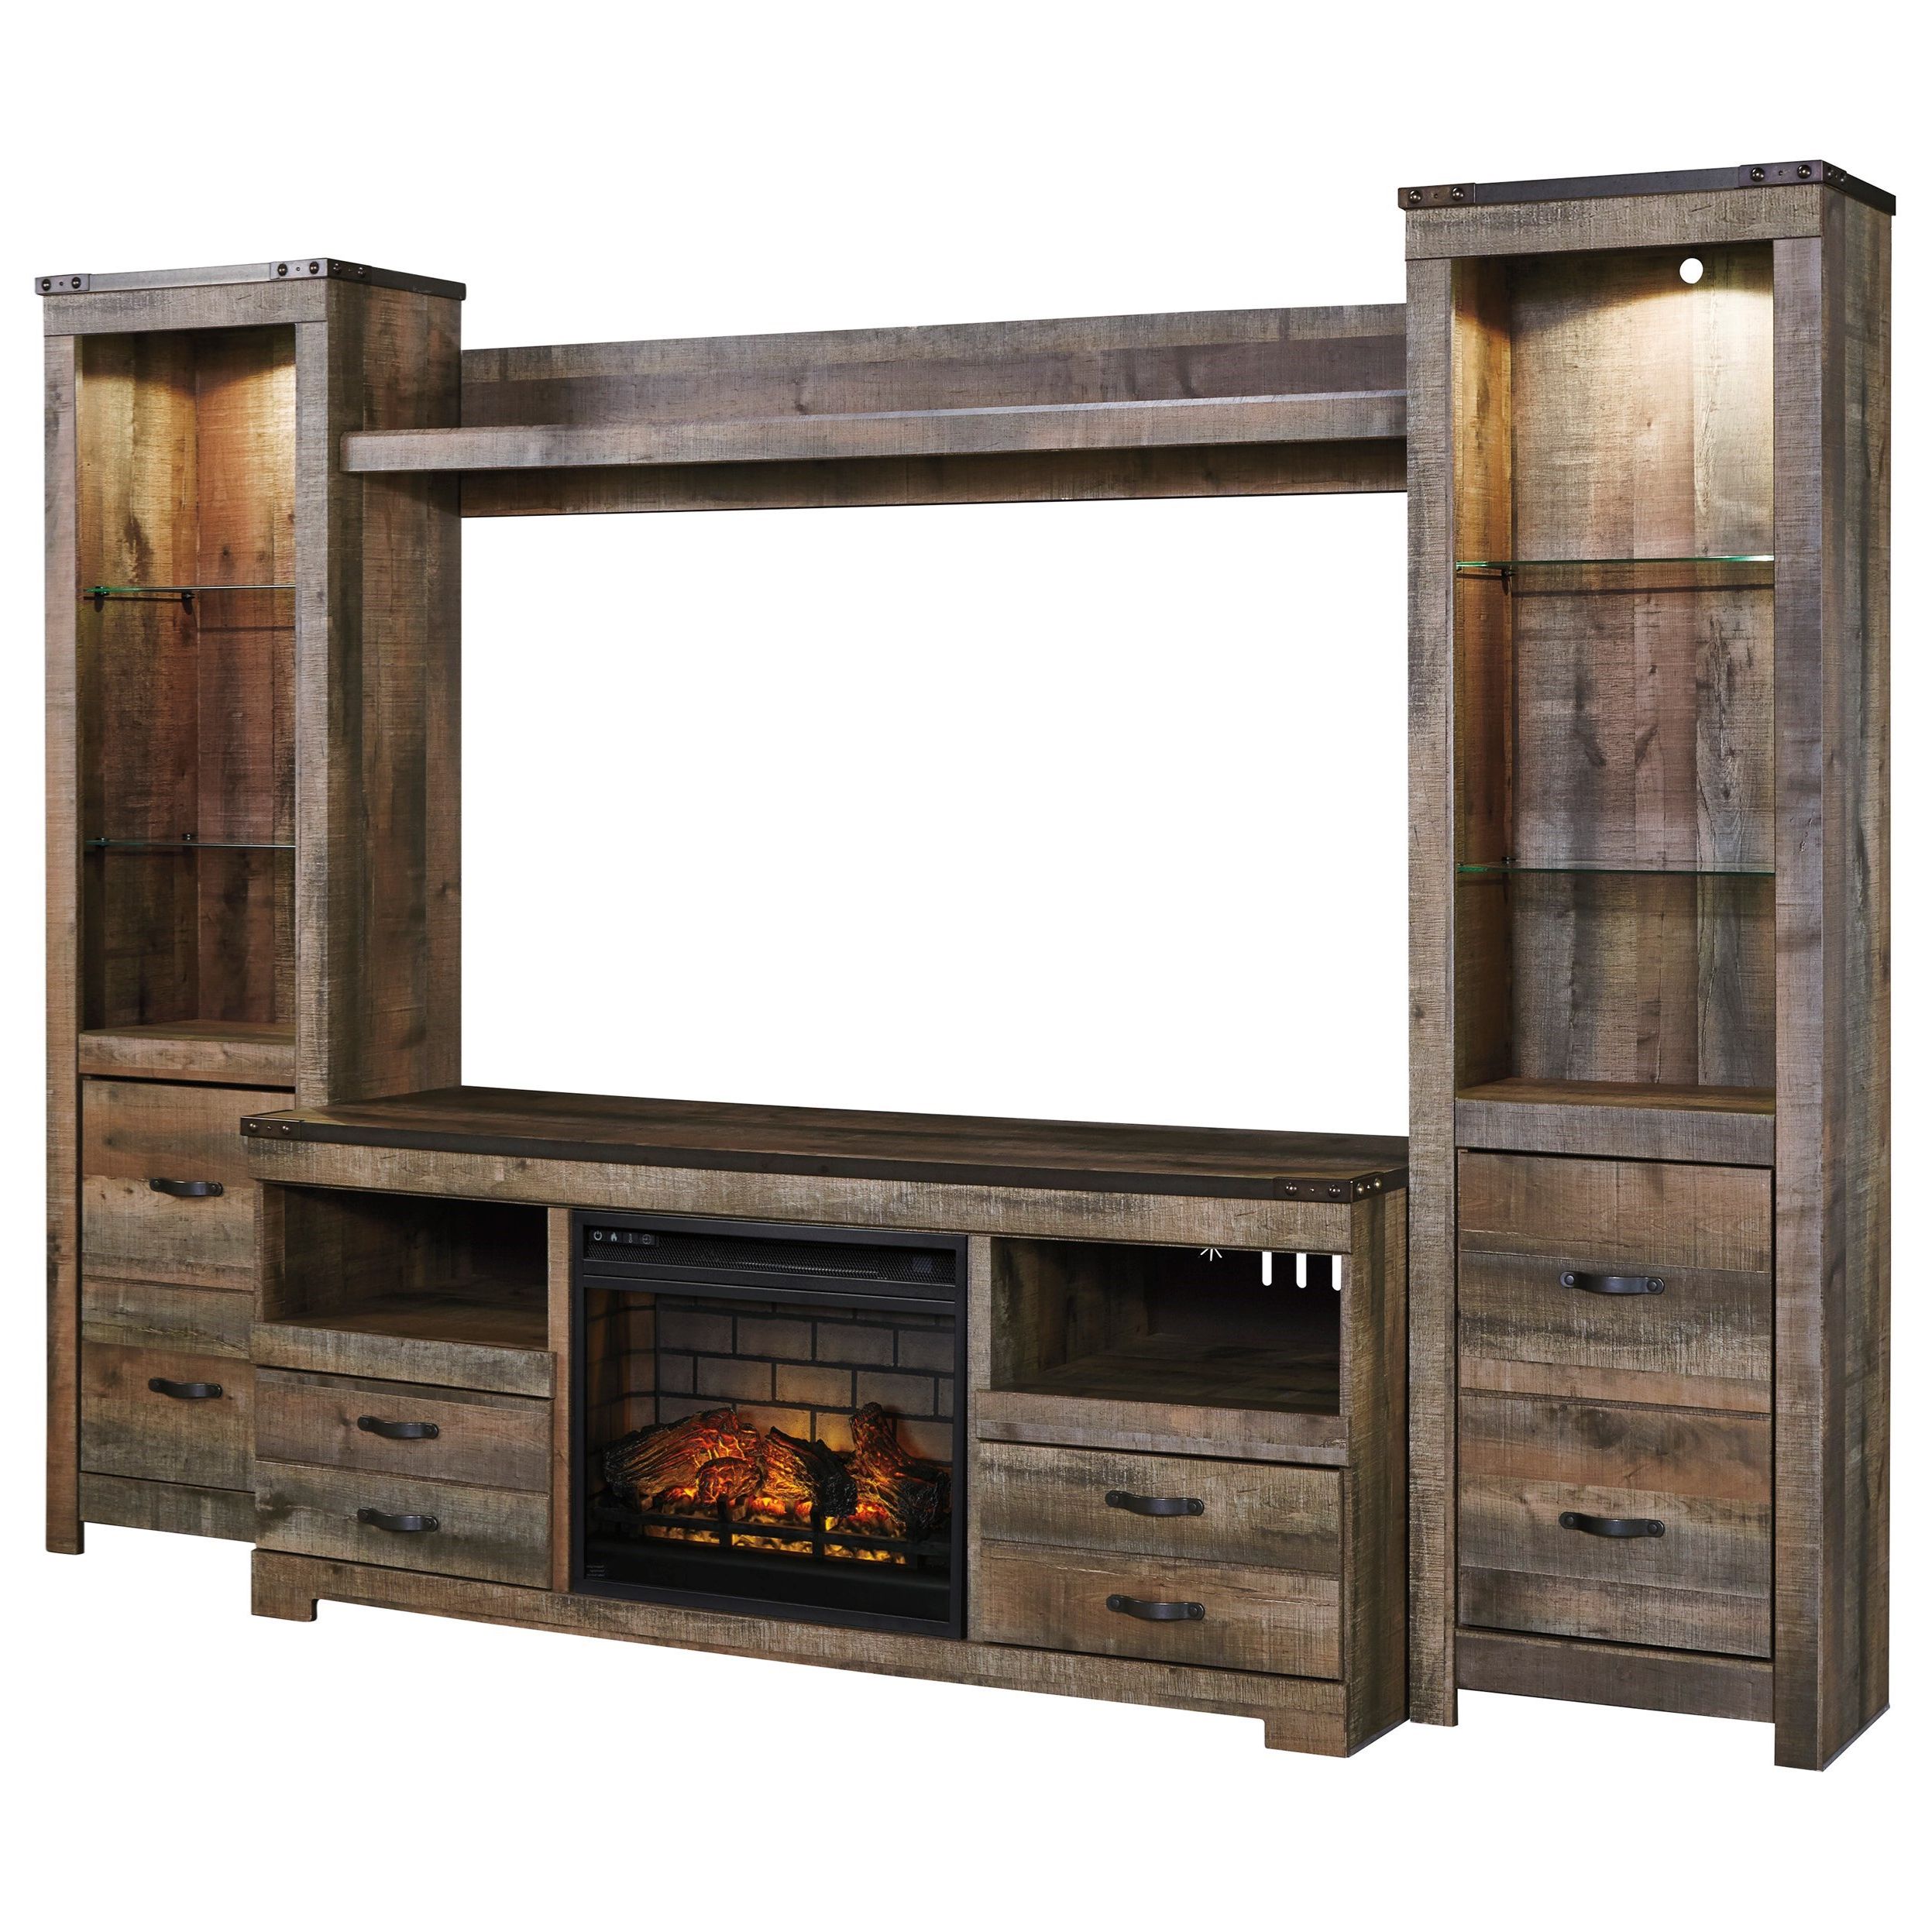 Signature Designashley Trinell W446w8 Rustic Large Tv Stand W/  Fireplace Insert, 2 Tall Piers, & Bridge | Factory Direct Furniture | Wall  Units Within Entertainment Units With Bridge (View 2 of 20)